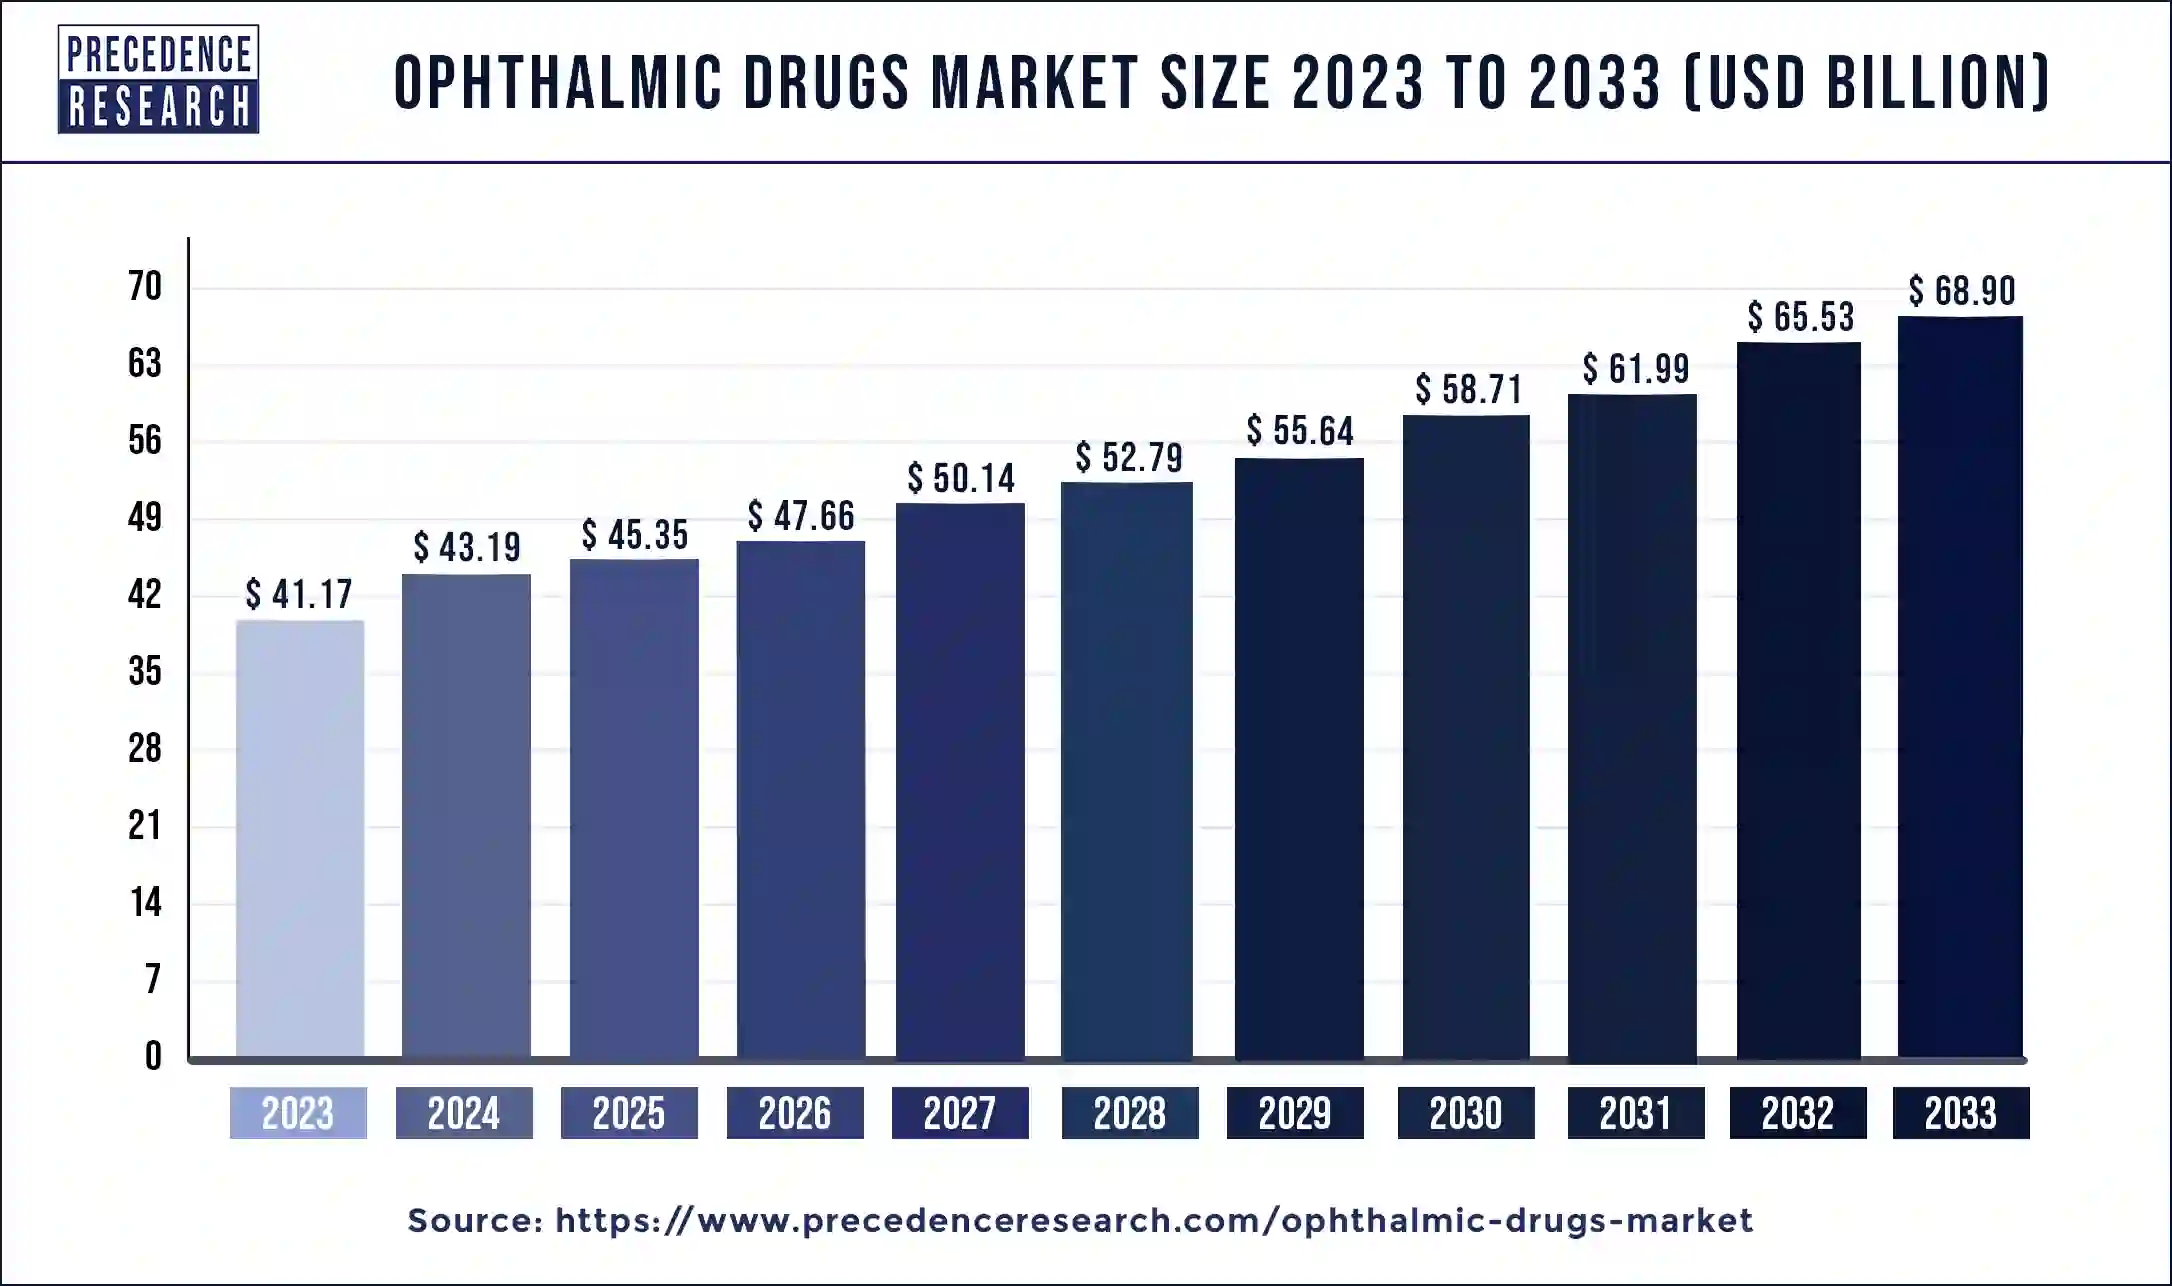 Ophthalmic Drugs Market Size 2024 to 2033